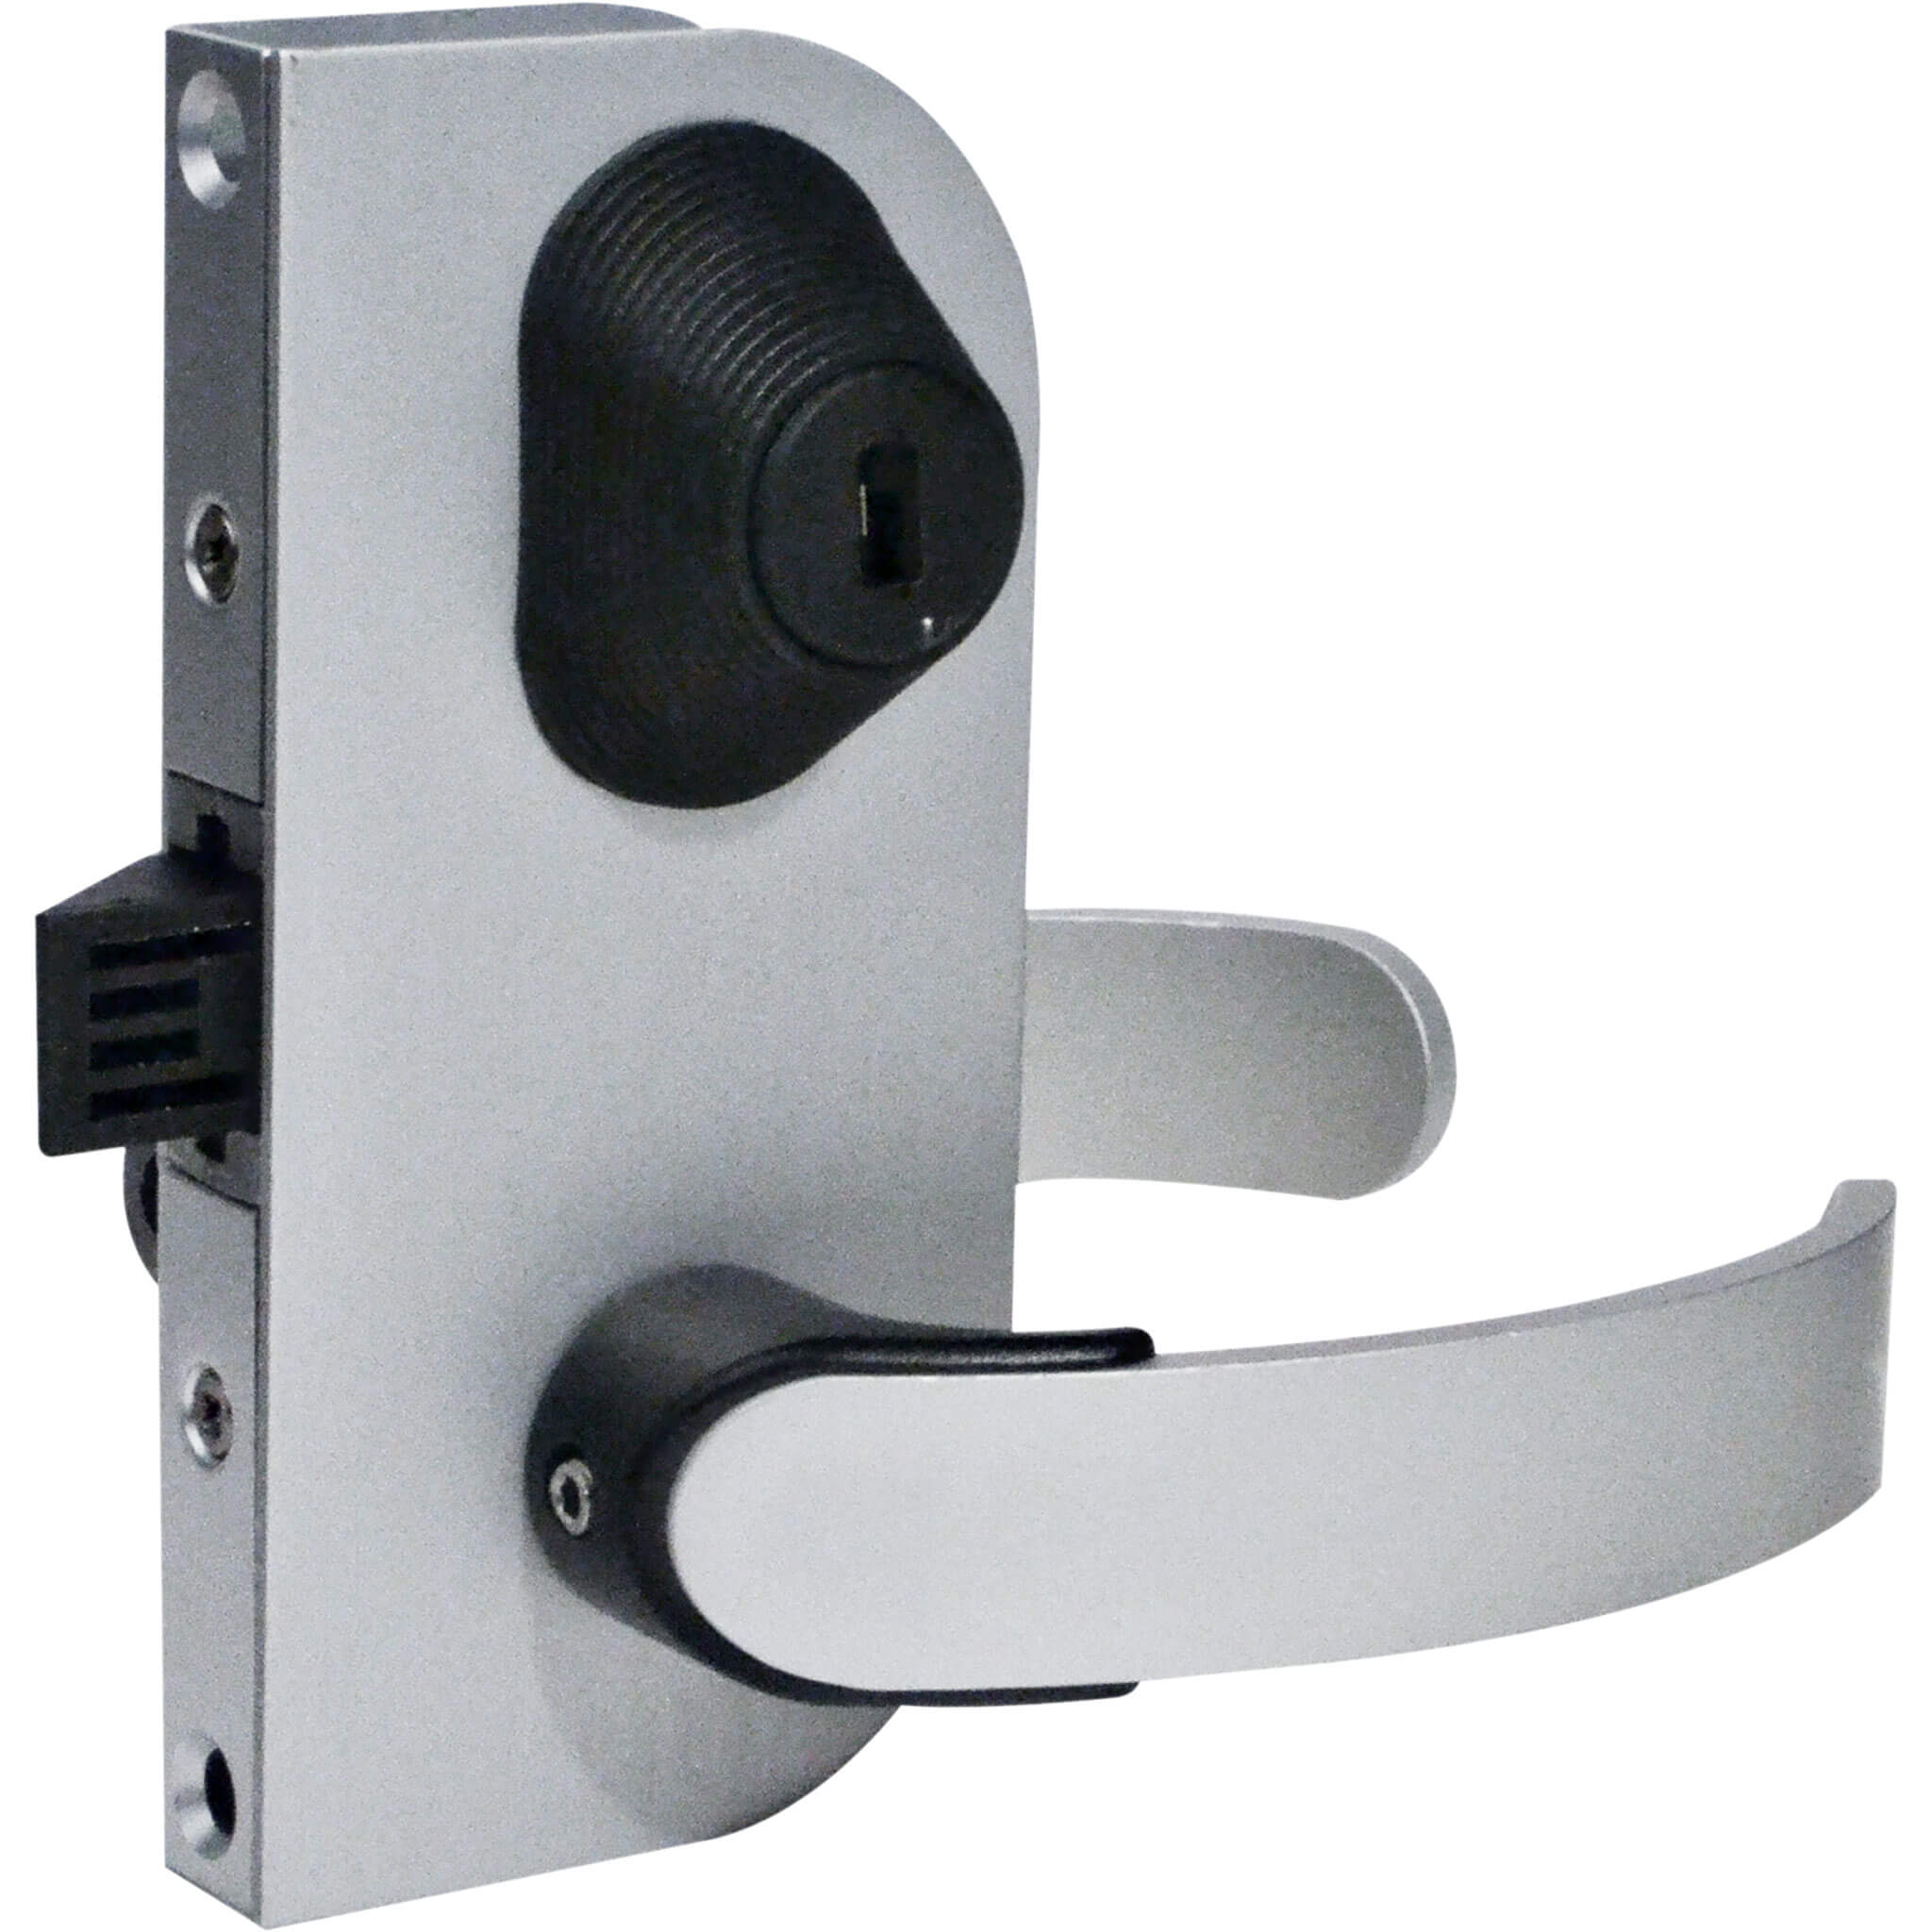 Offshore Swing Door Latch Locking | Boat Outfitters